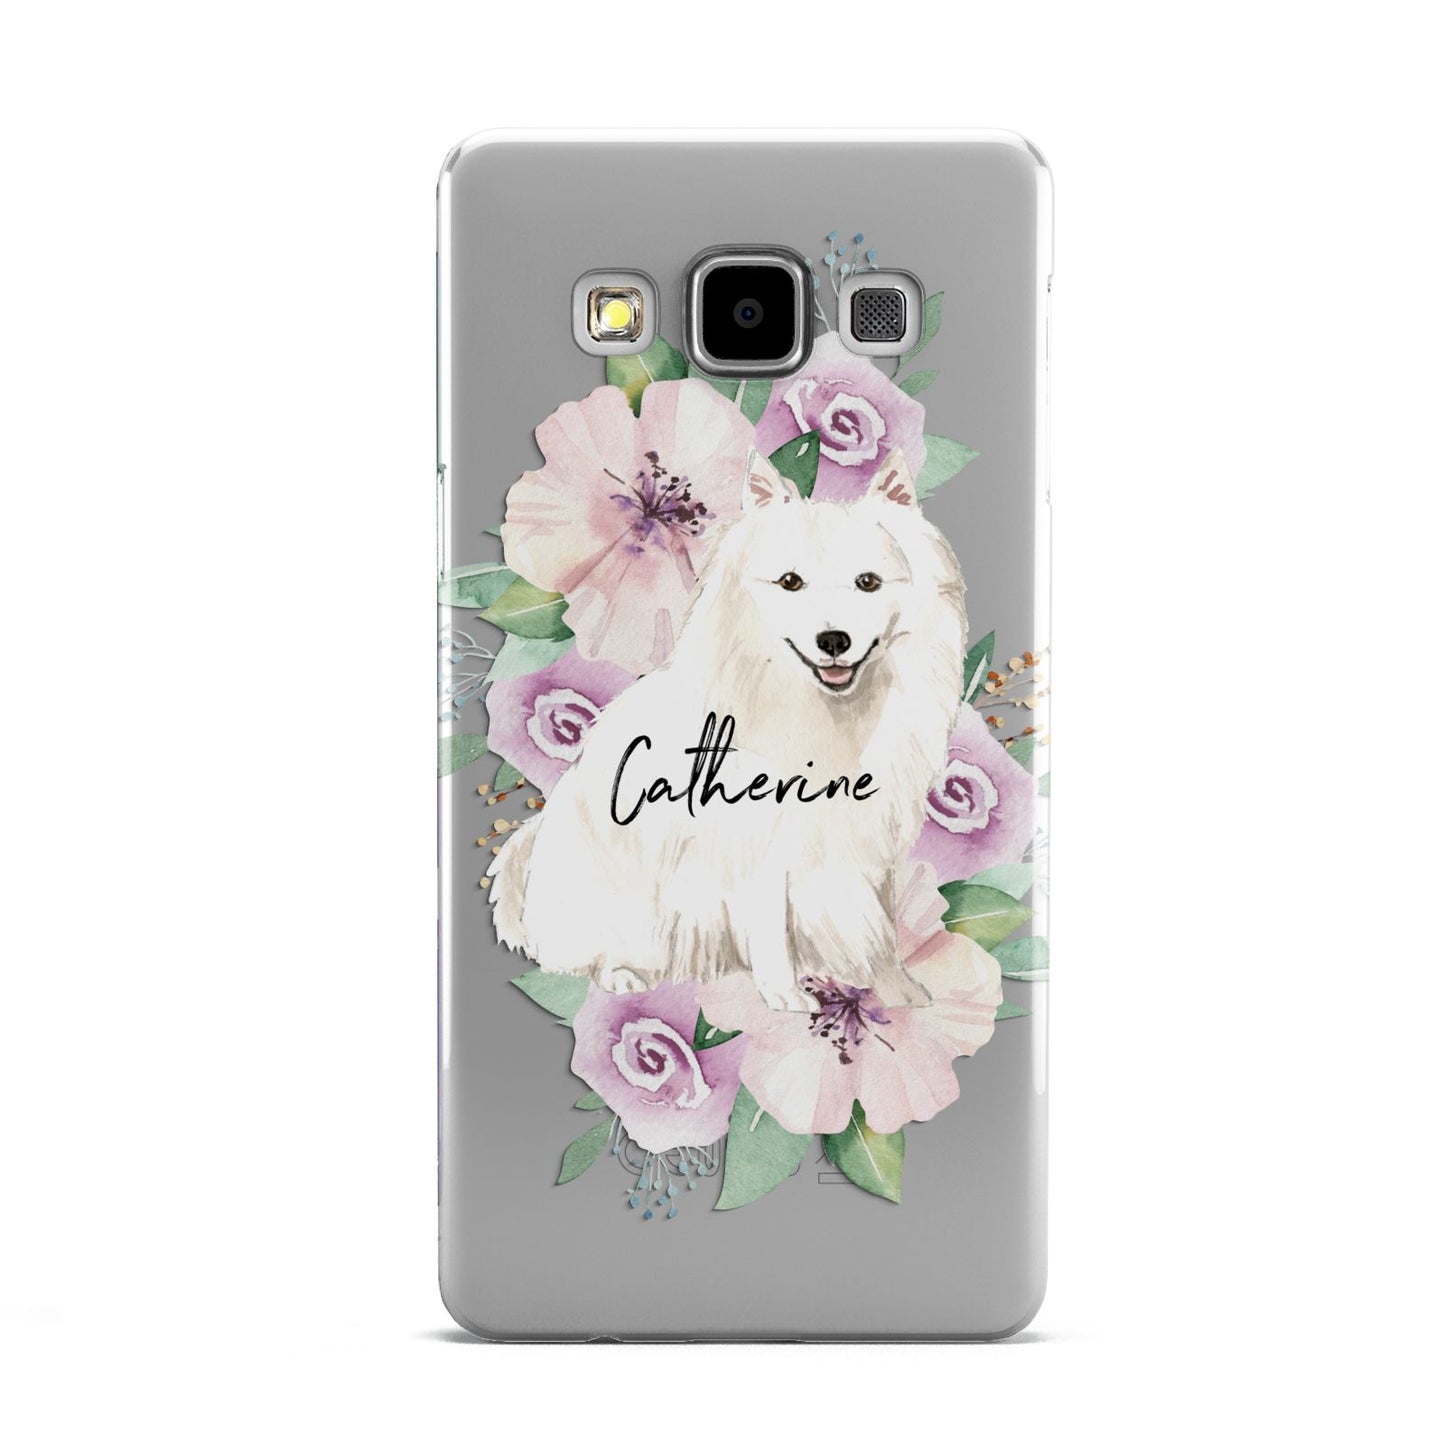 Personalised Japanese Spitz Samsung Galaxy A5 Case